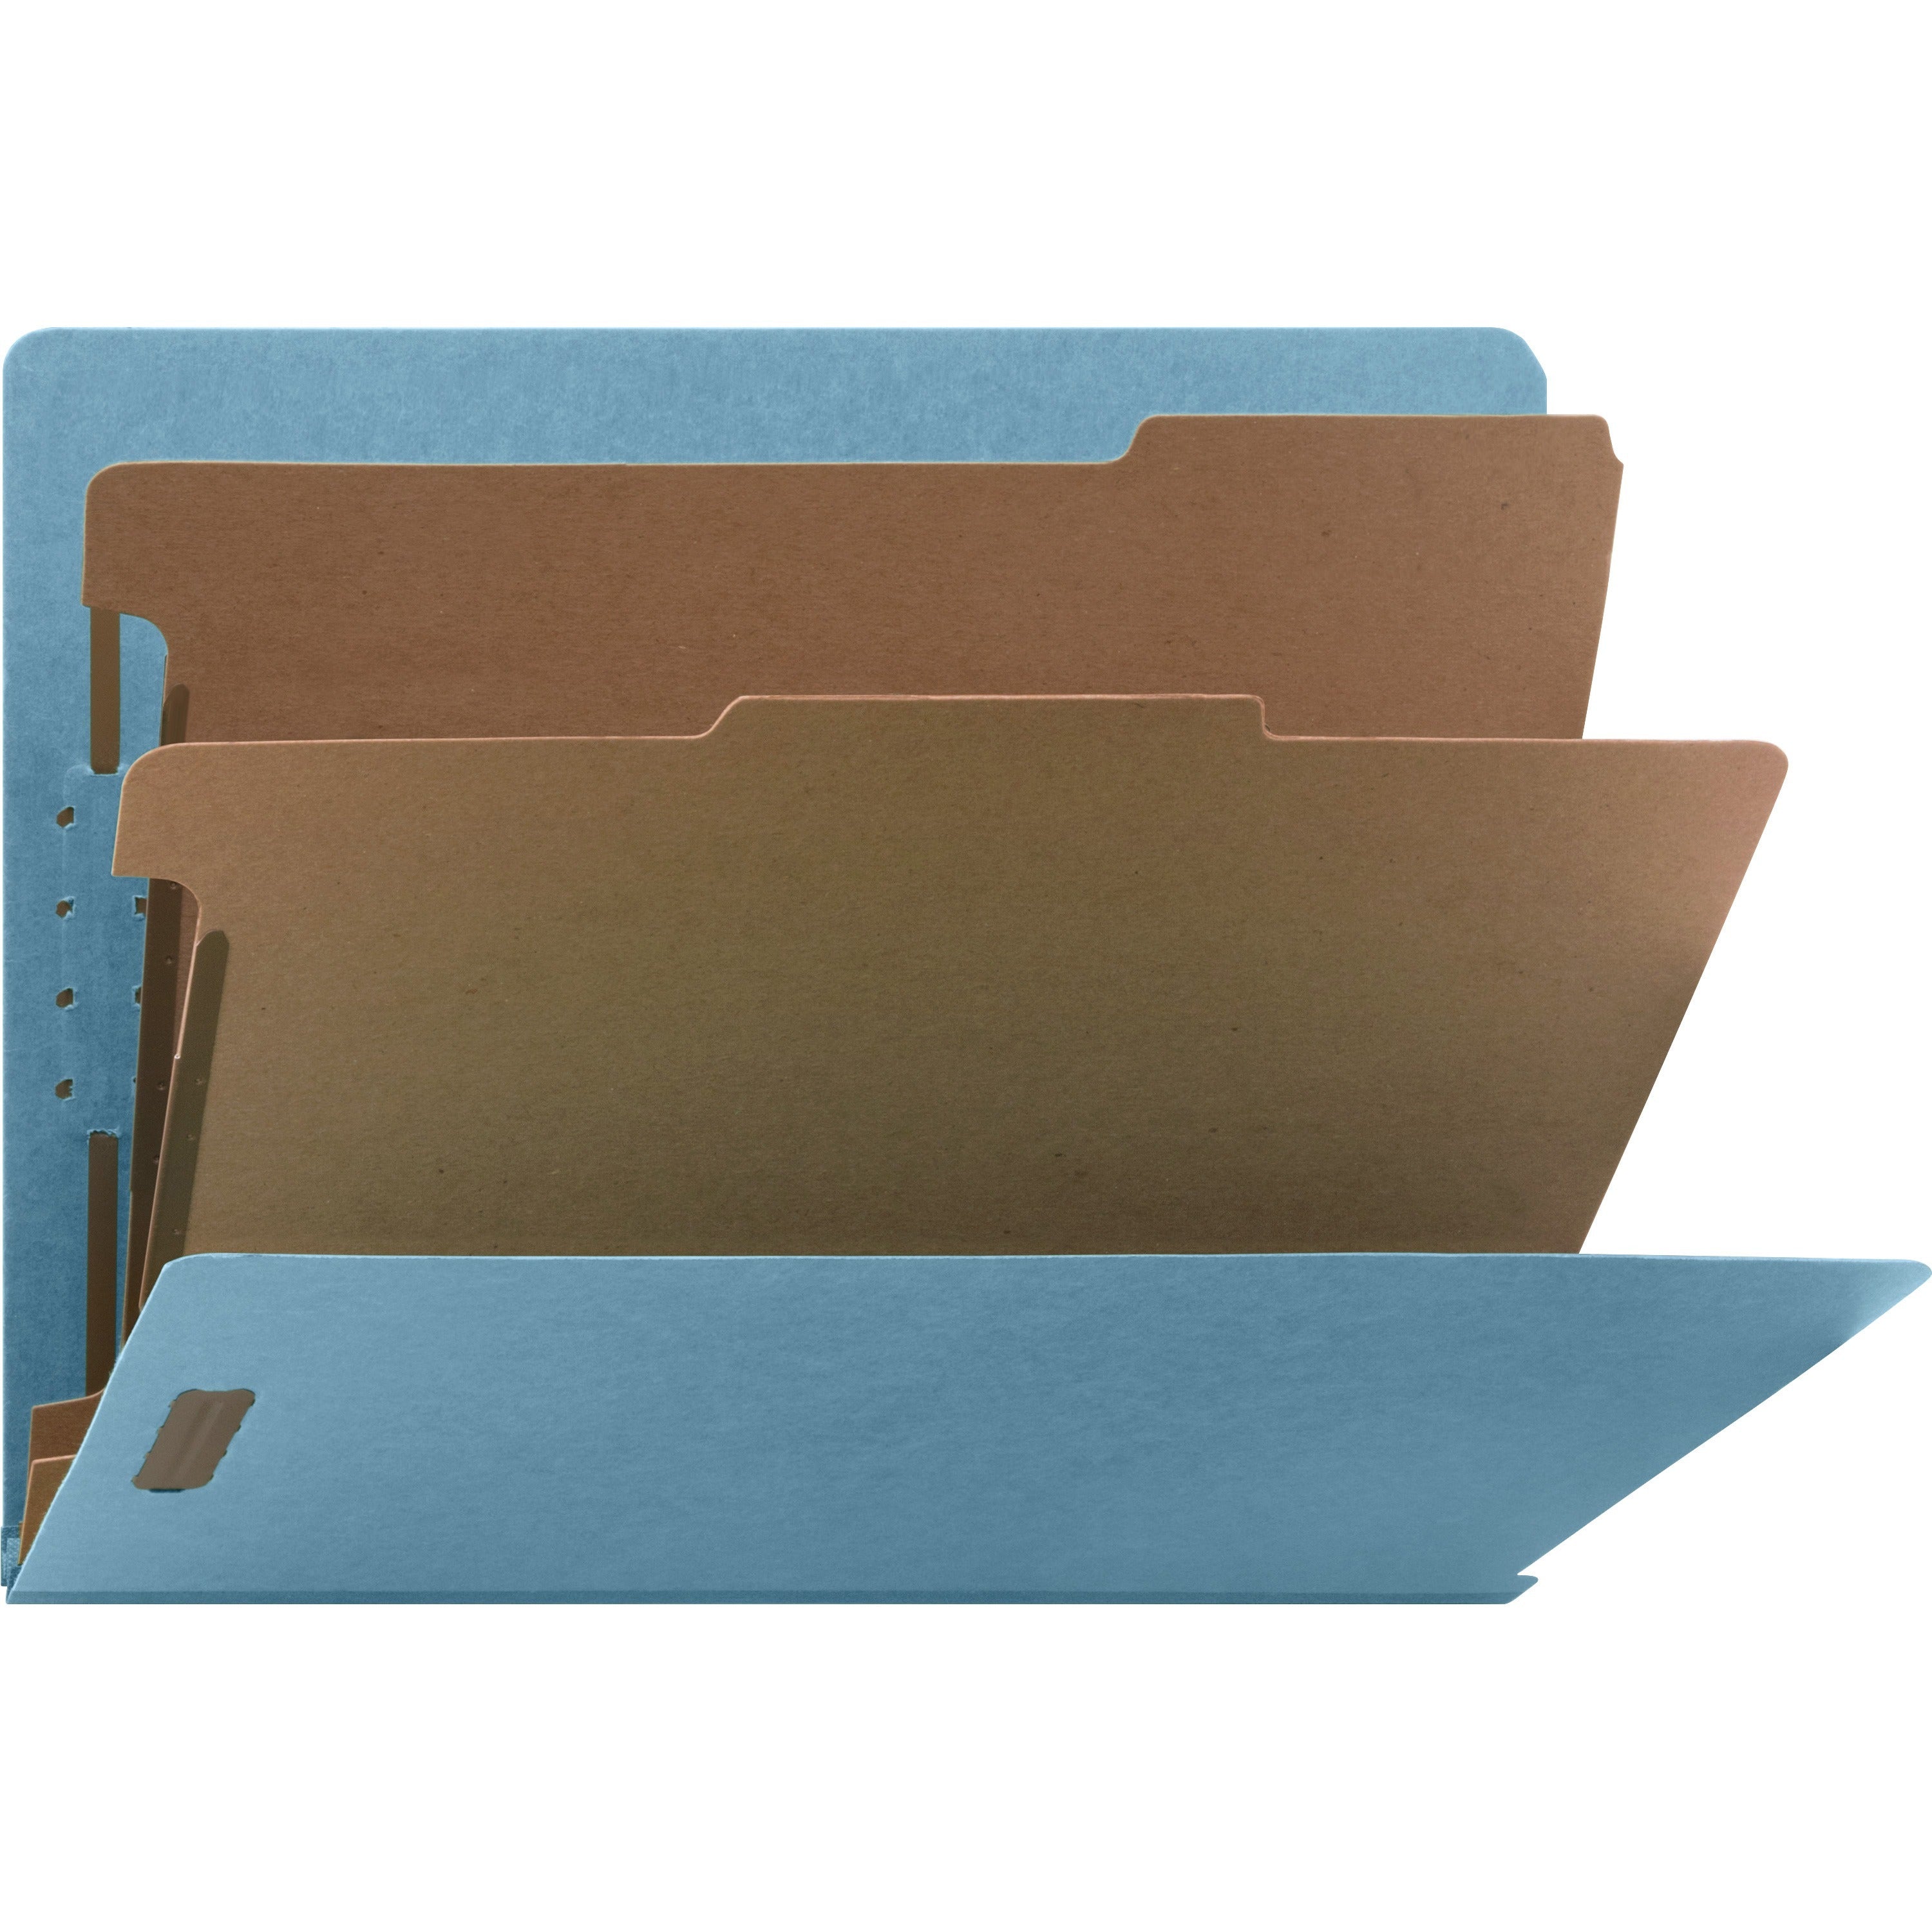 Nature Saver Letter Recycled Classification Folder - 8 1/2" x 11" - End Tab Location - 2 Divider(s) - Fiberboard - Blue - 100% Recycled - 10 / Box - 